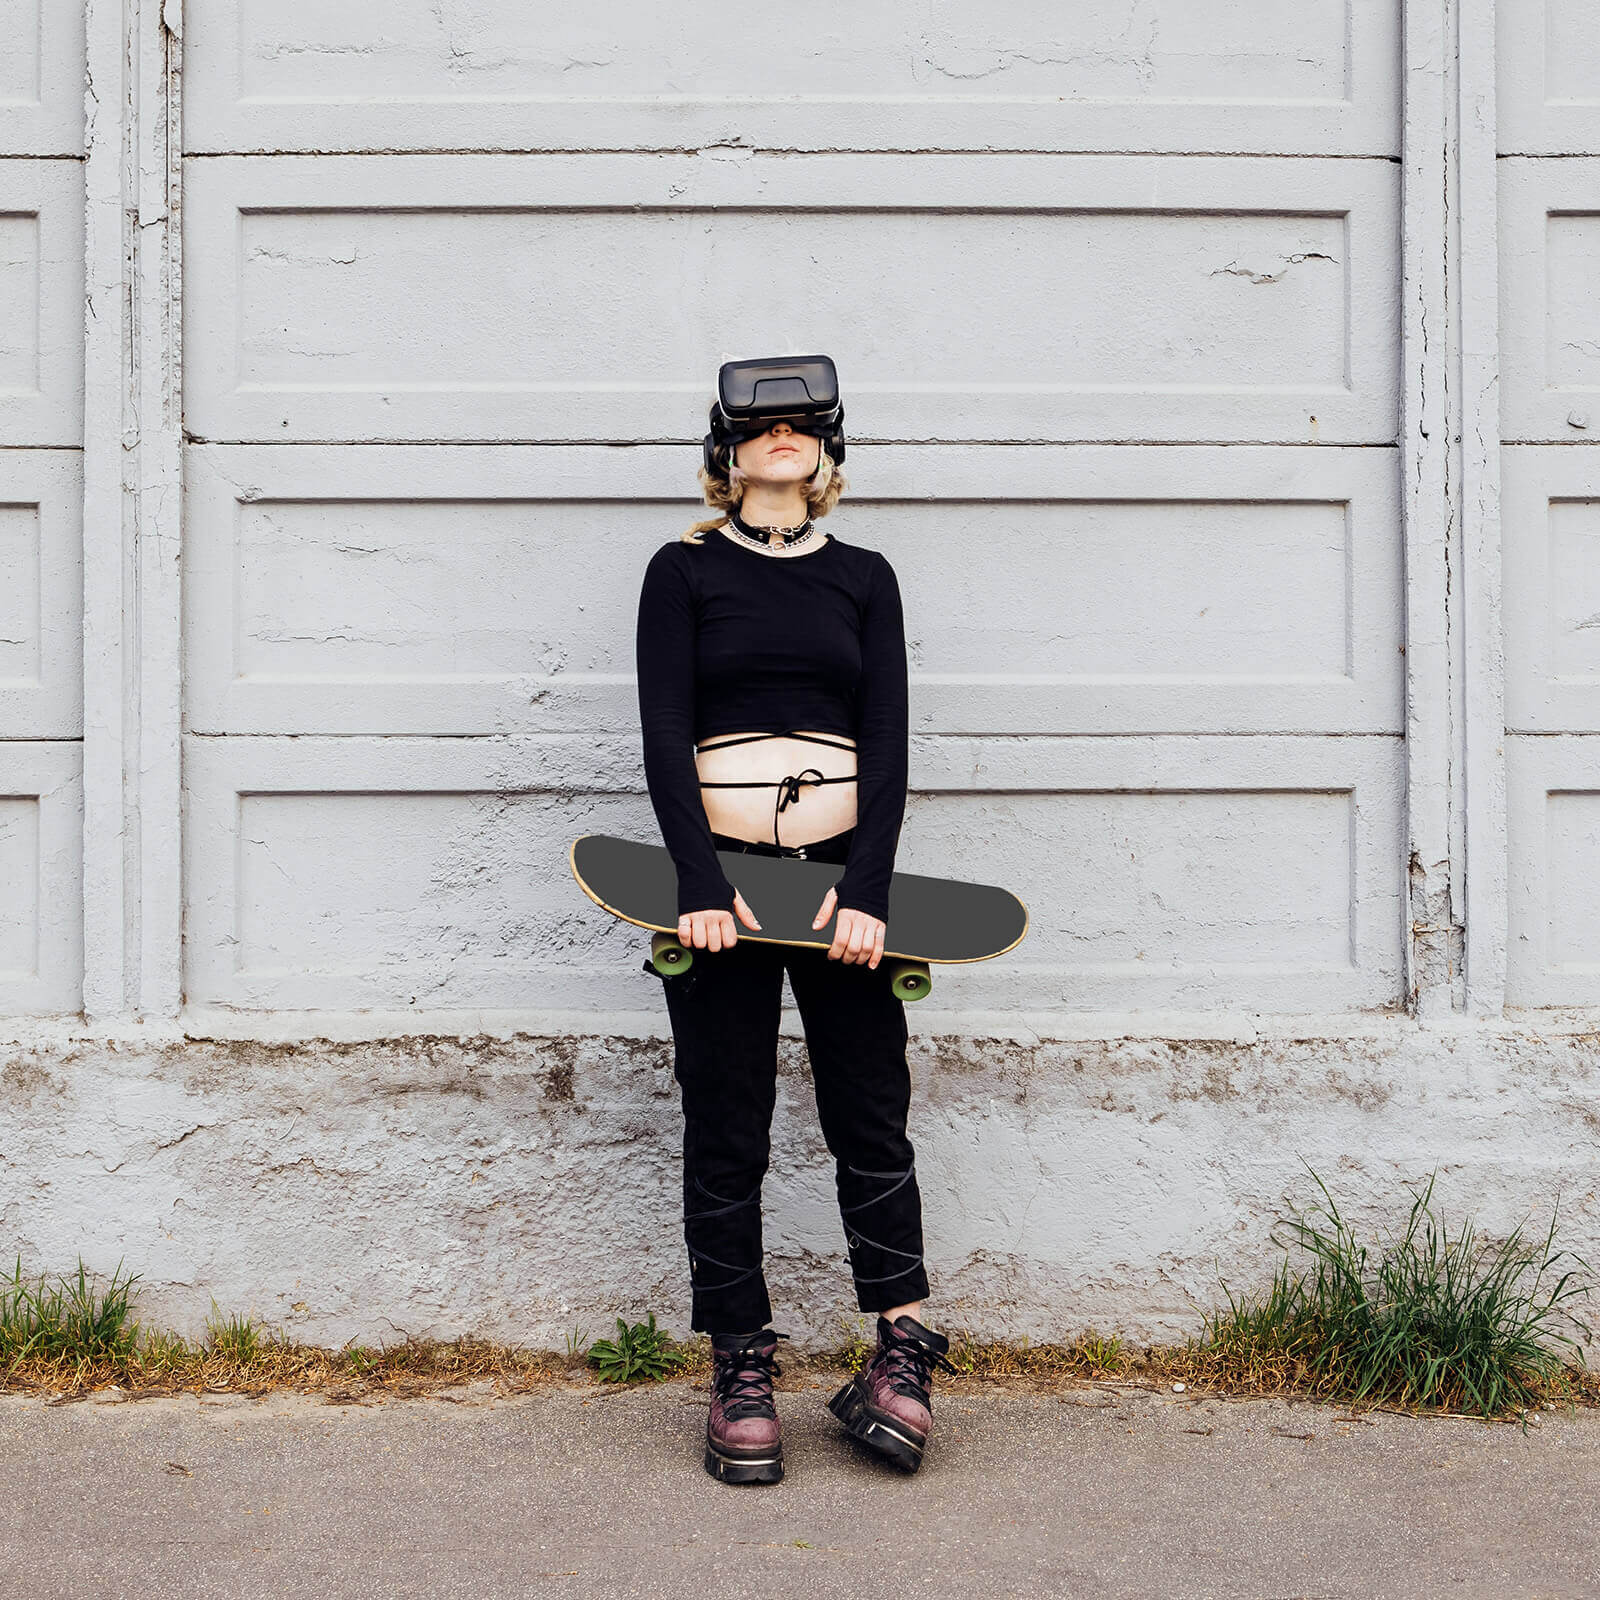 Teenage girl wearing a VR headset and holding a skateboard outside